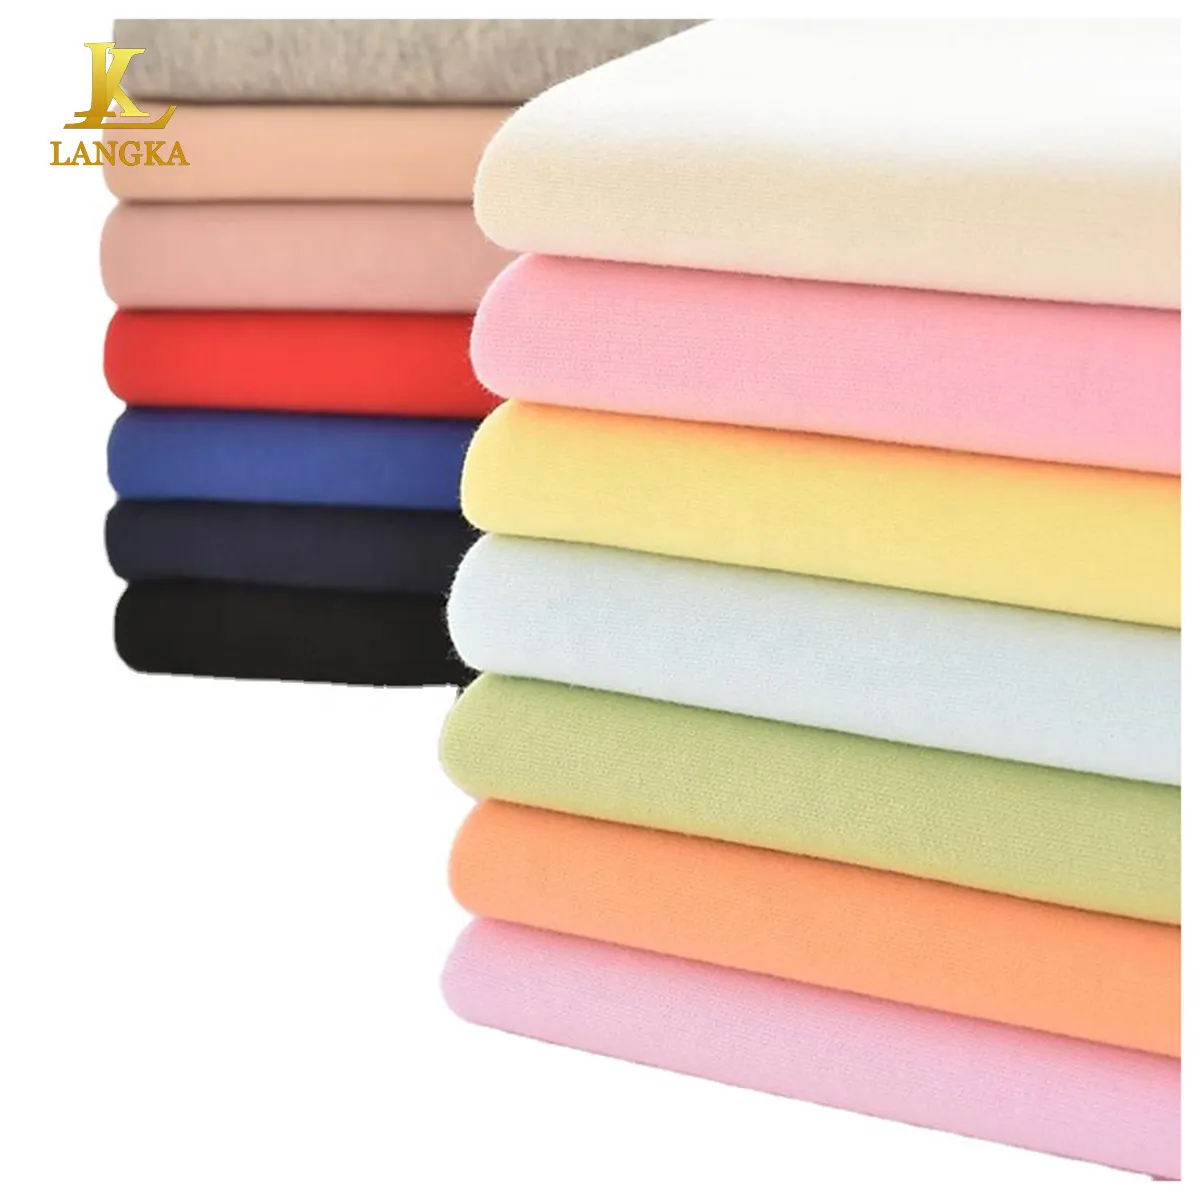 Langka brushed plain dye 380gsm 400gsm 80 cotton 20 polyester french terry knitted fleece hoodie fabric material for sweatshirt